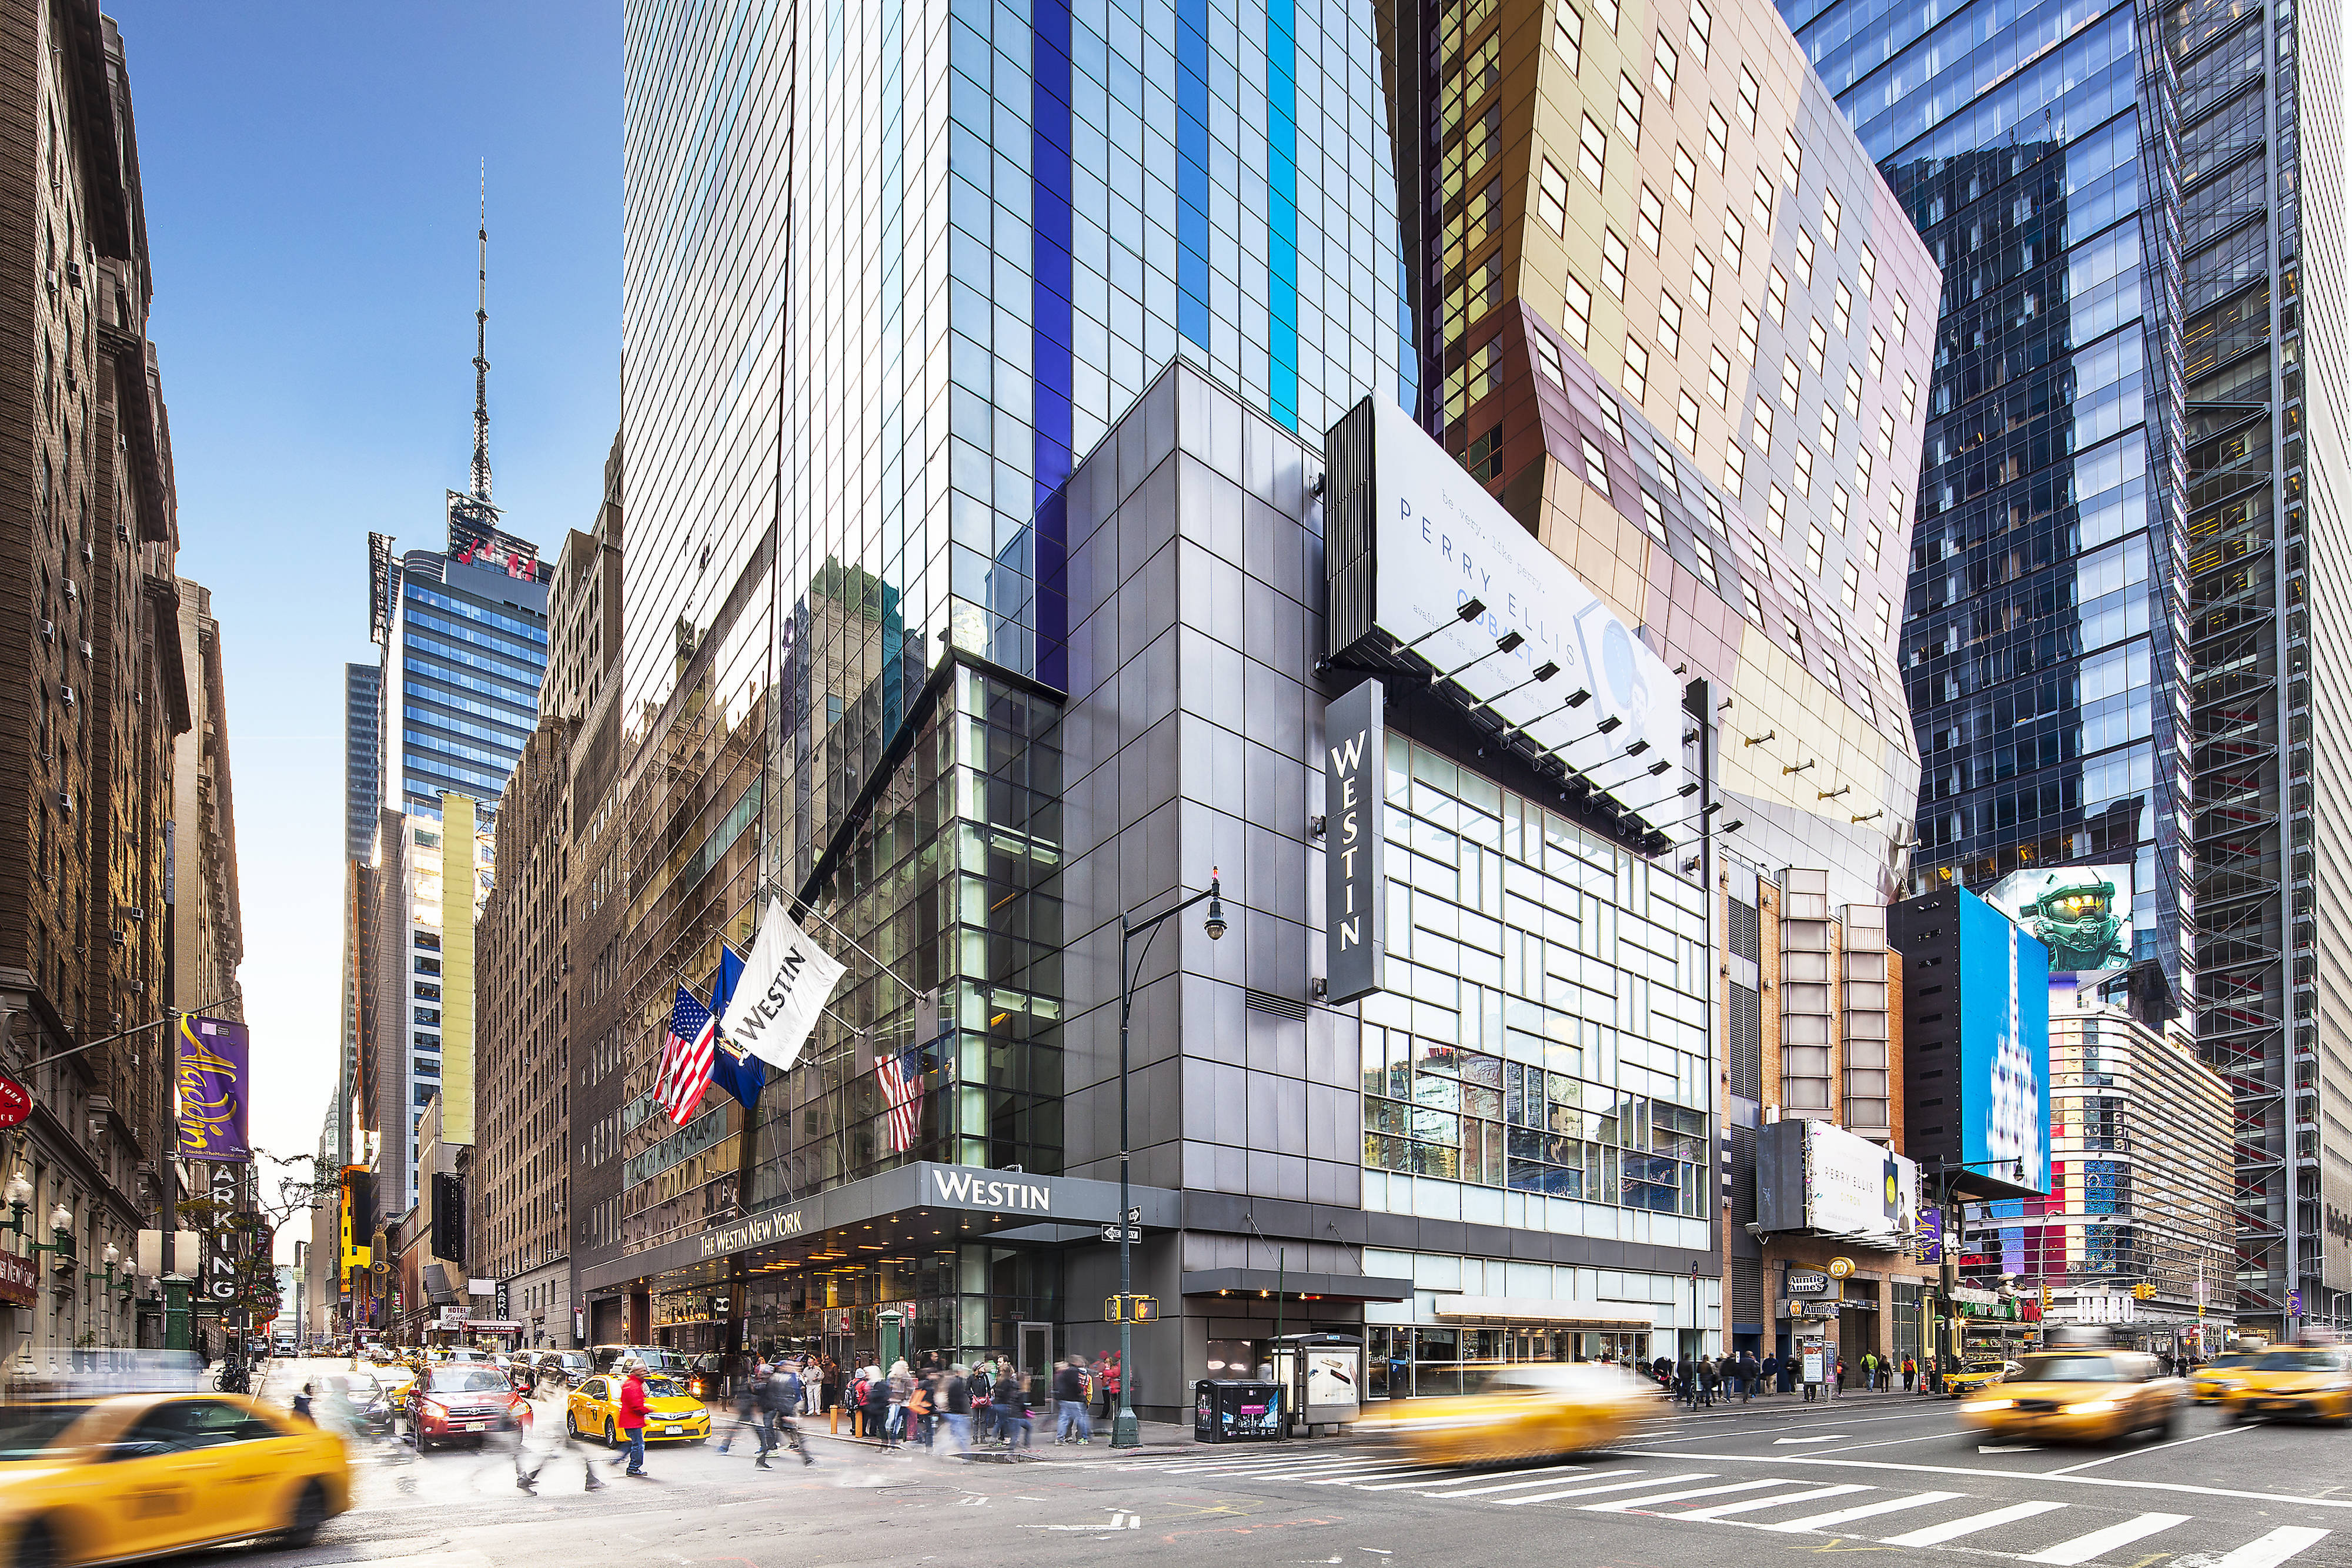 Photo of The Westin New York at Times Square, New York, NY